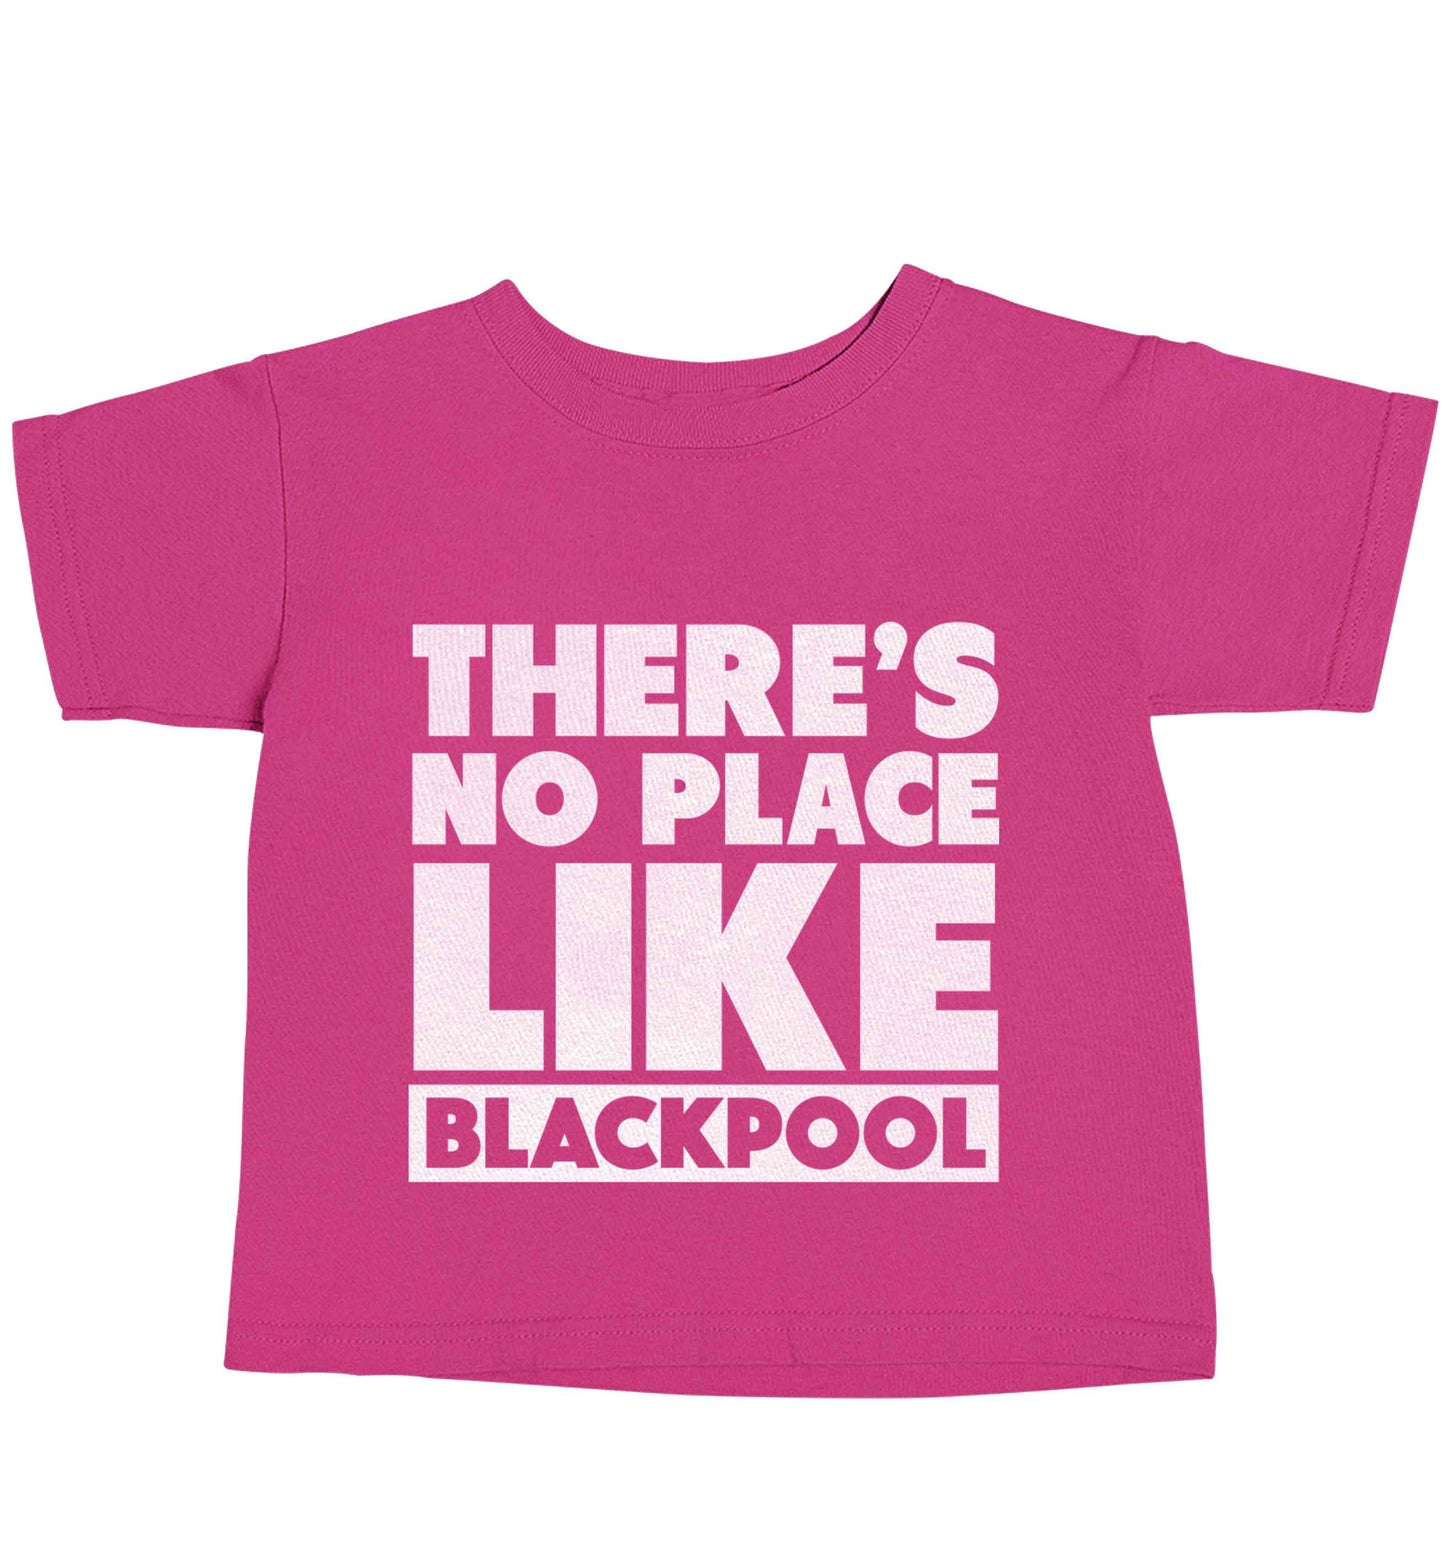 There's no place like Blackpool pink baby toddler Tshirt 2 Years